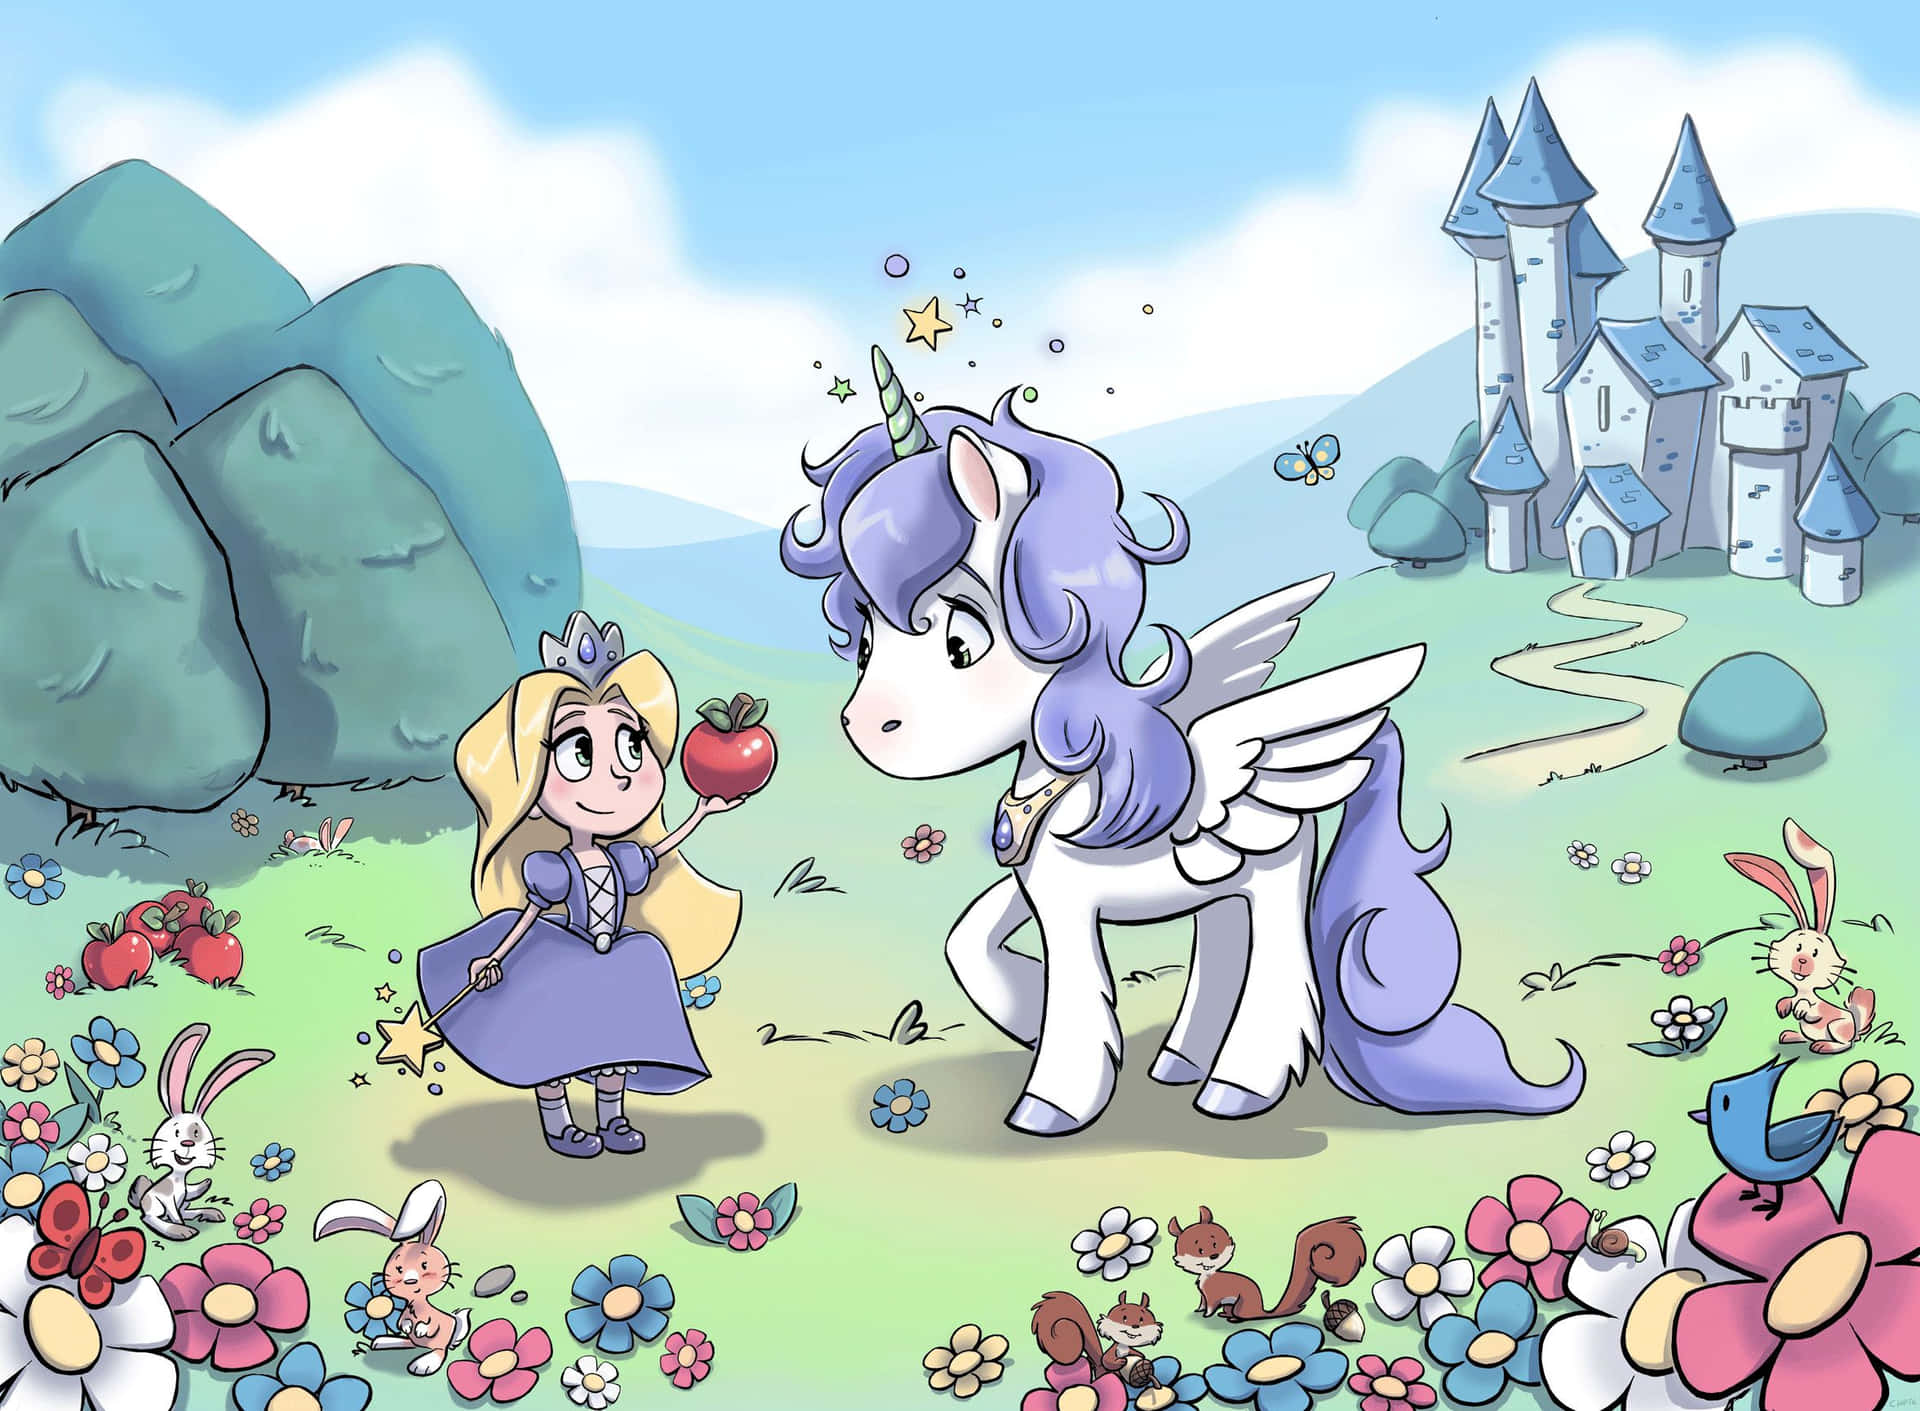 "Magical Moment: Adorable Unicorn in a Fairyland"